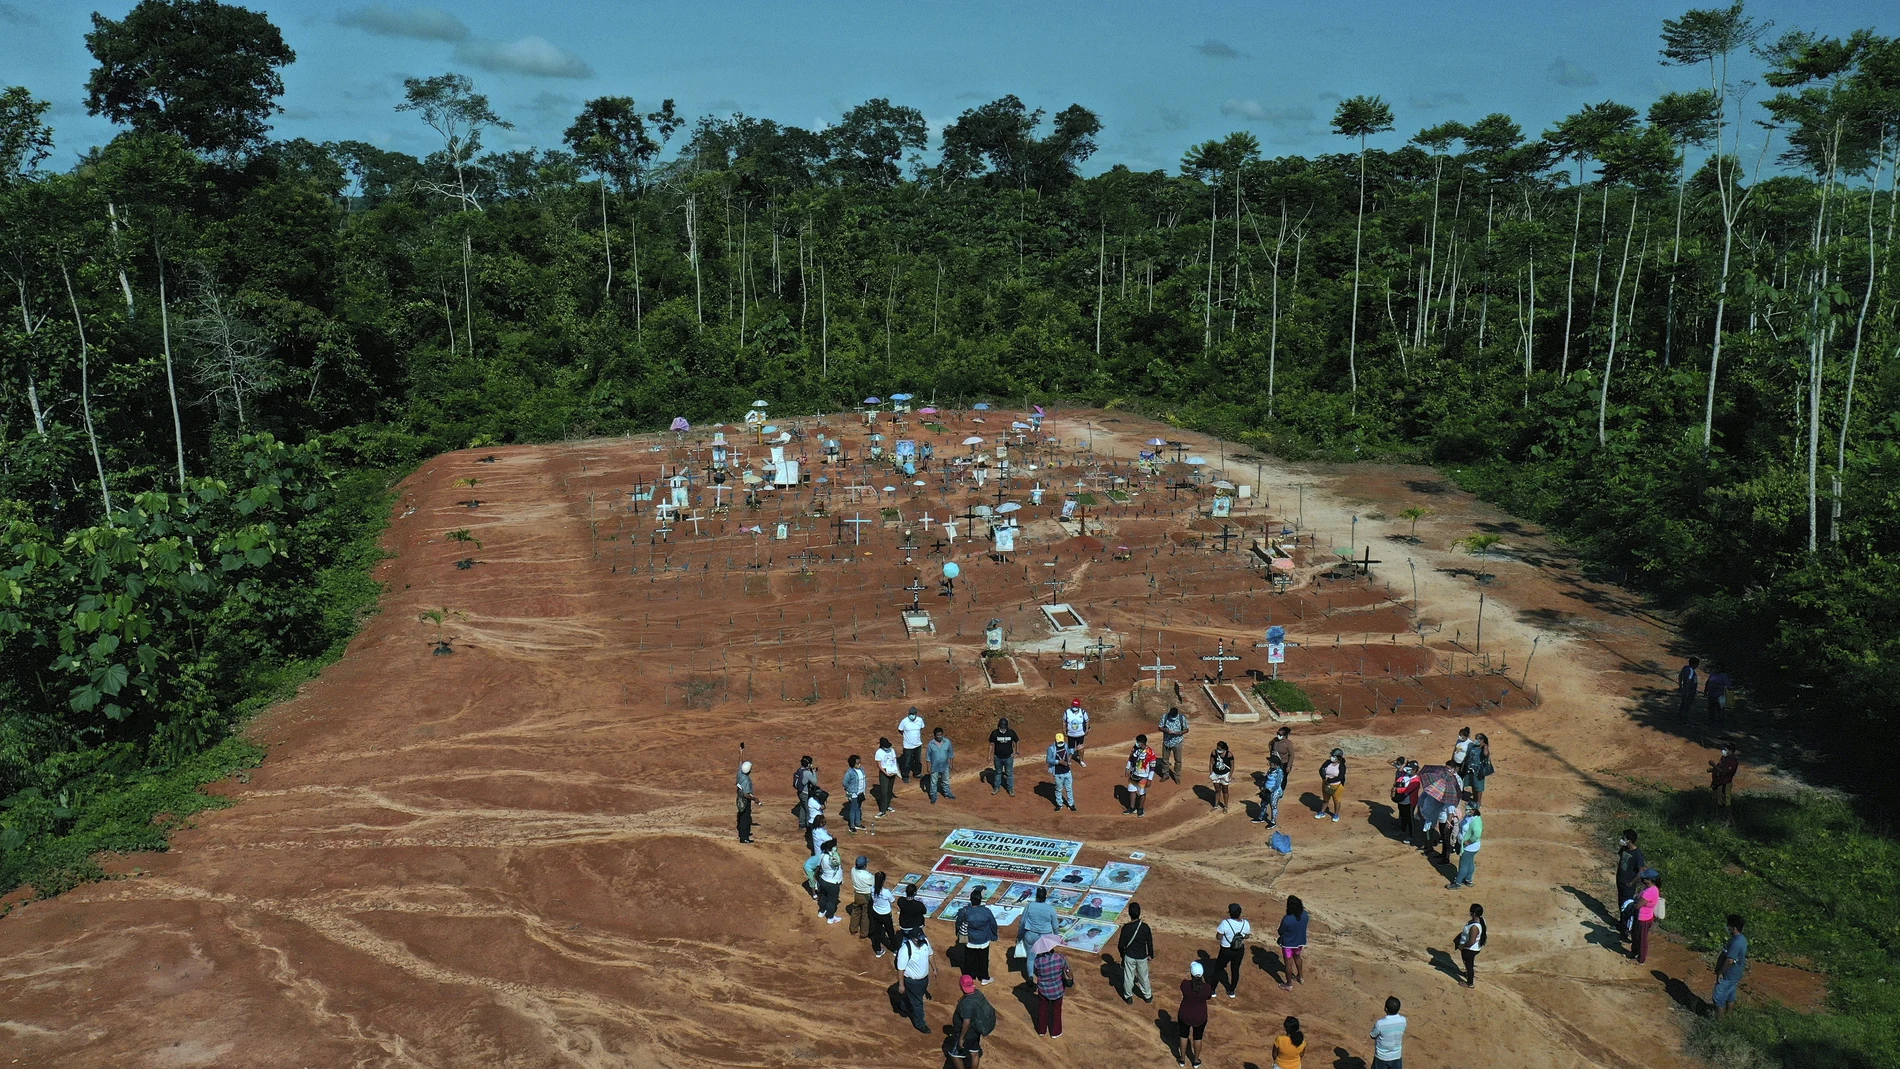 Relatives of people who died from COVID-19 gather next to a clandestine mass grave on the outskirts of Iquitos, Peru, Saturday, March 20, 2021. Local authorities approved the mass burials but never told the families, who believed their loved ones were interred in the nearby local cemetery â€” and only months later discovered the truth.Â (AP Photo/Rodrigo Abd)